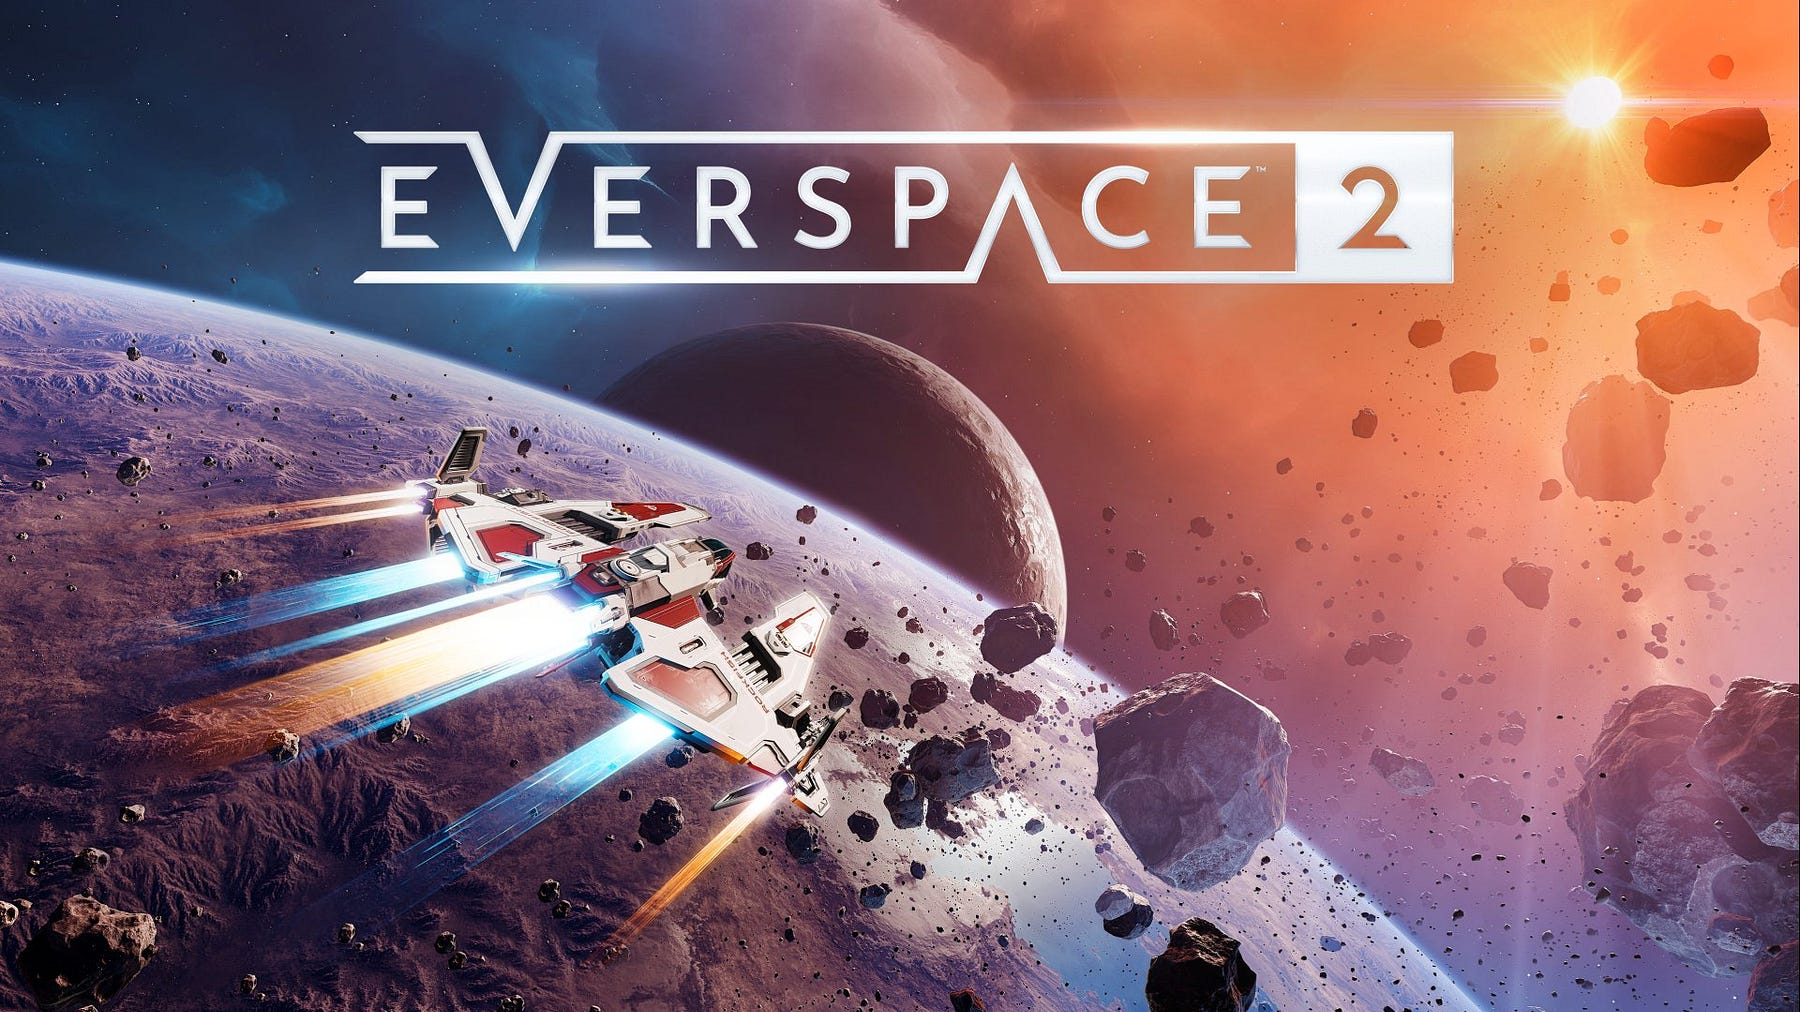 “Everspace 2” Review: A Wonderful Space ARPG